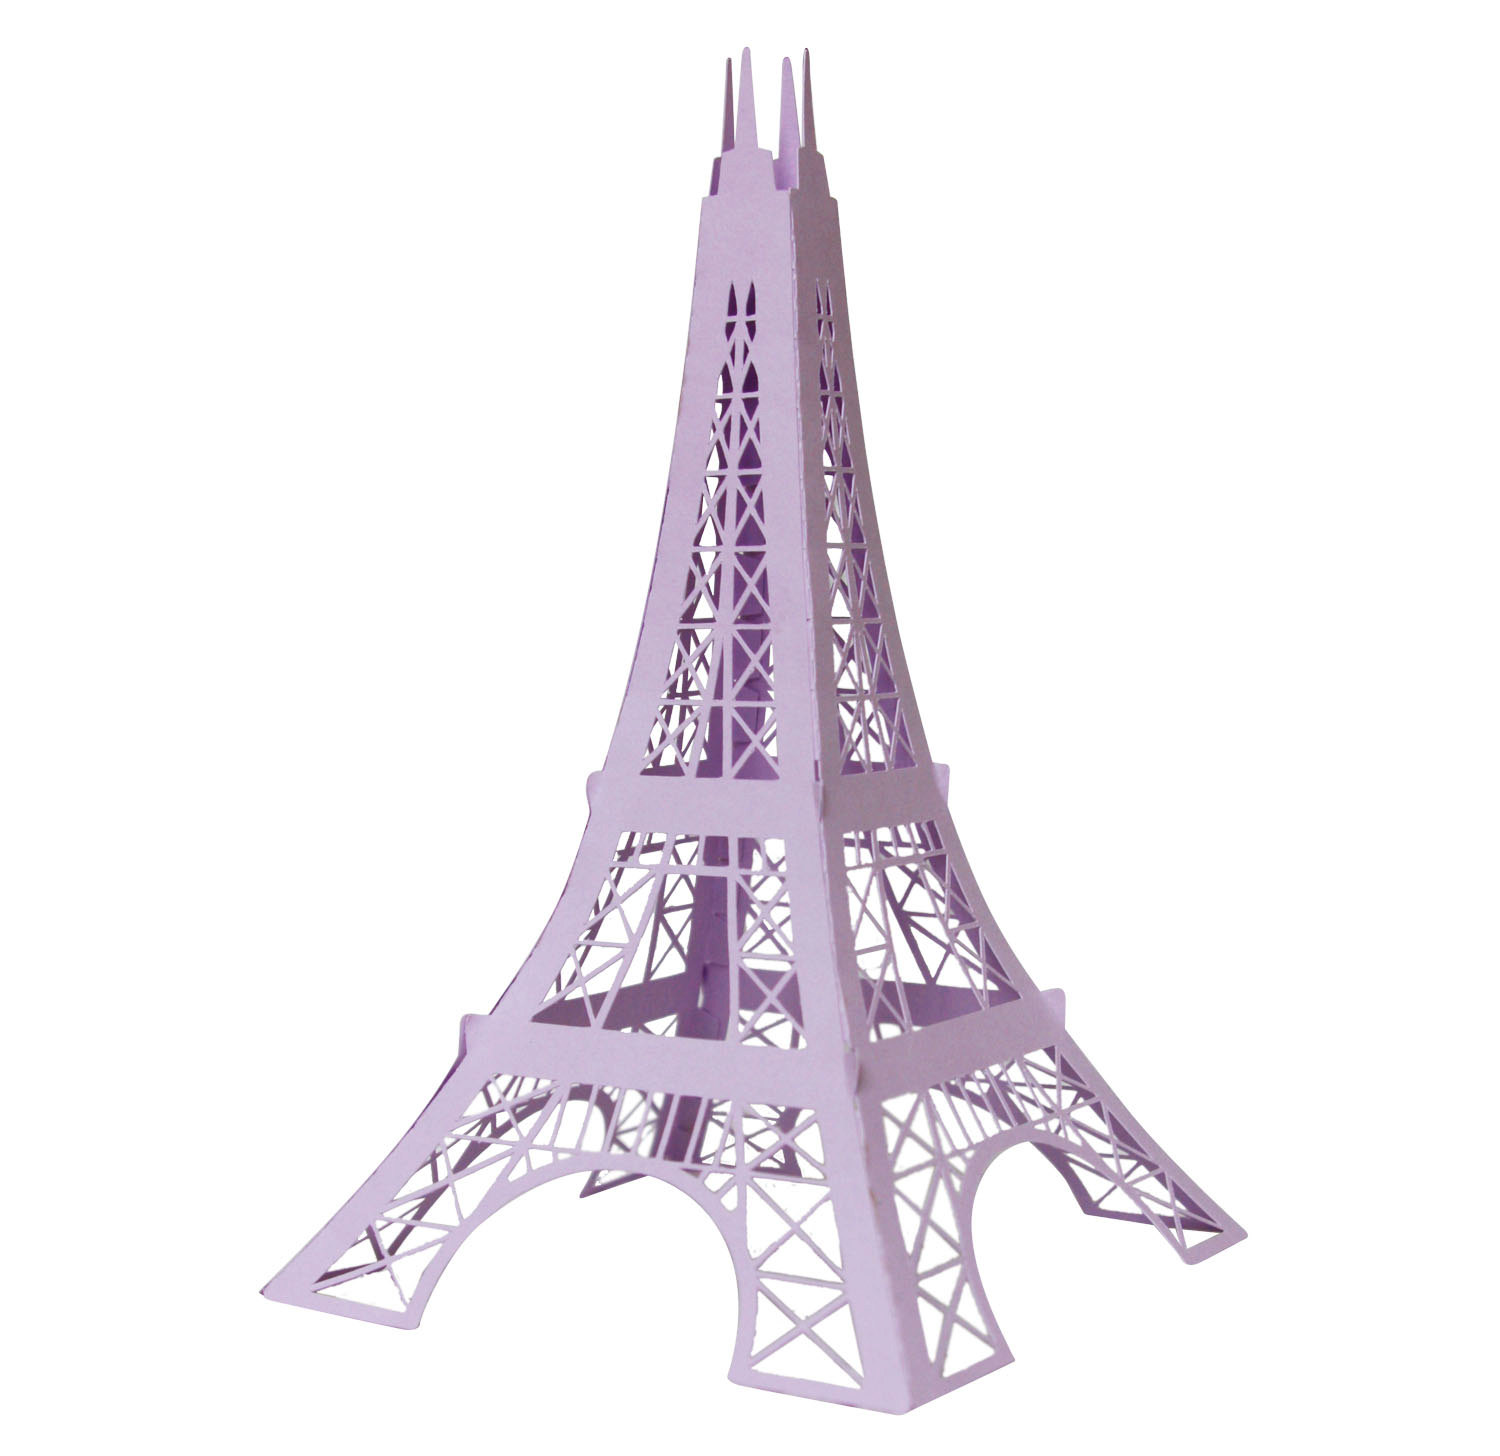 Eiffel Tower svg, Download Eiffel Tower svg for free 2019